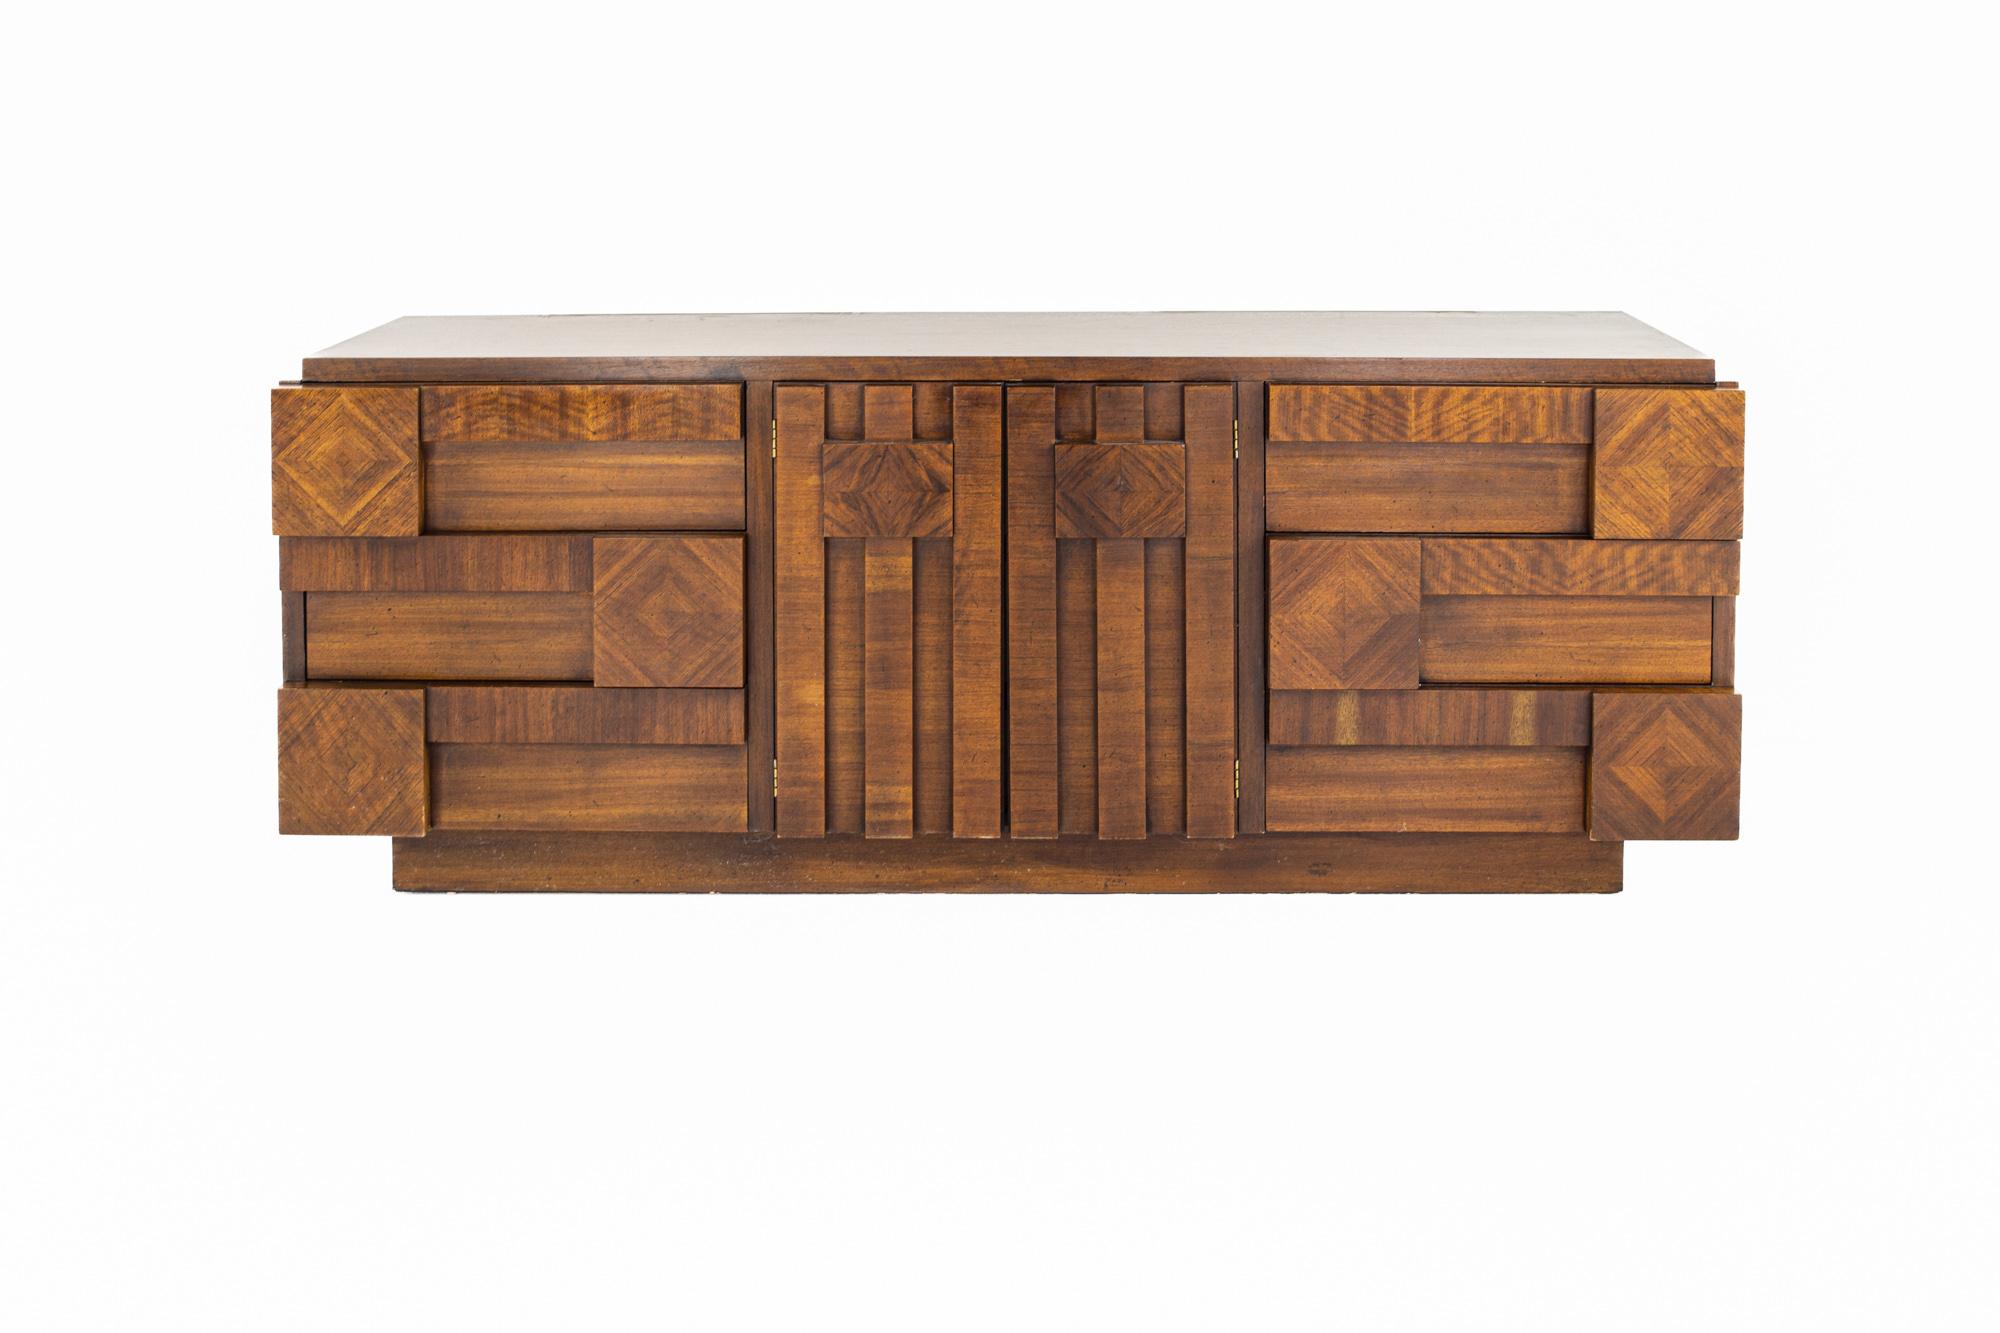 Lane Brutalist Mid Century Walnut Lowboy Dresser

The dresser measures: 79 wide x 19.5 deep x 31 inches high

All pieces of furniture can be had in what we call restored vintage condition. That means the piece is restored upon purchase so it’s